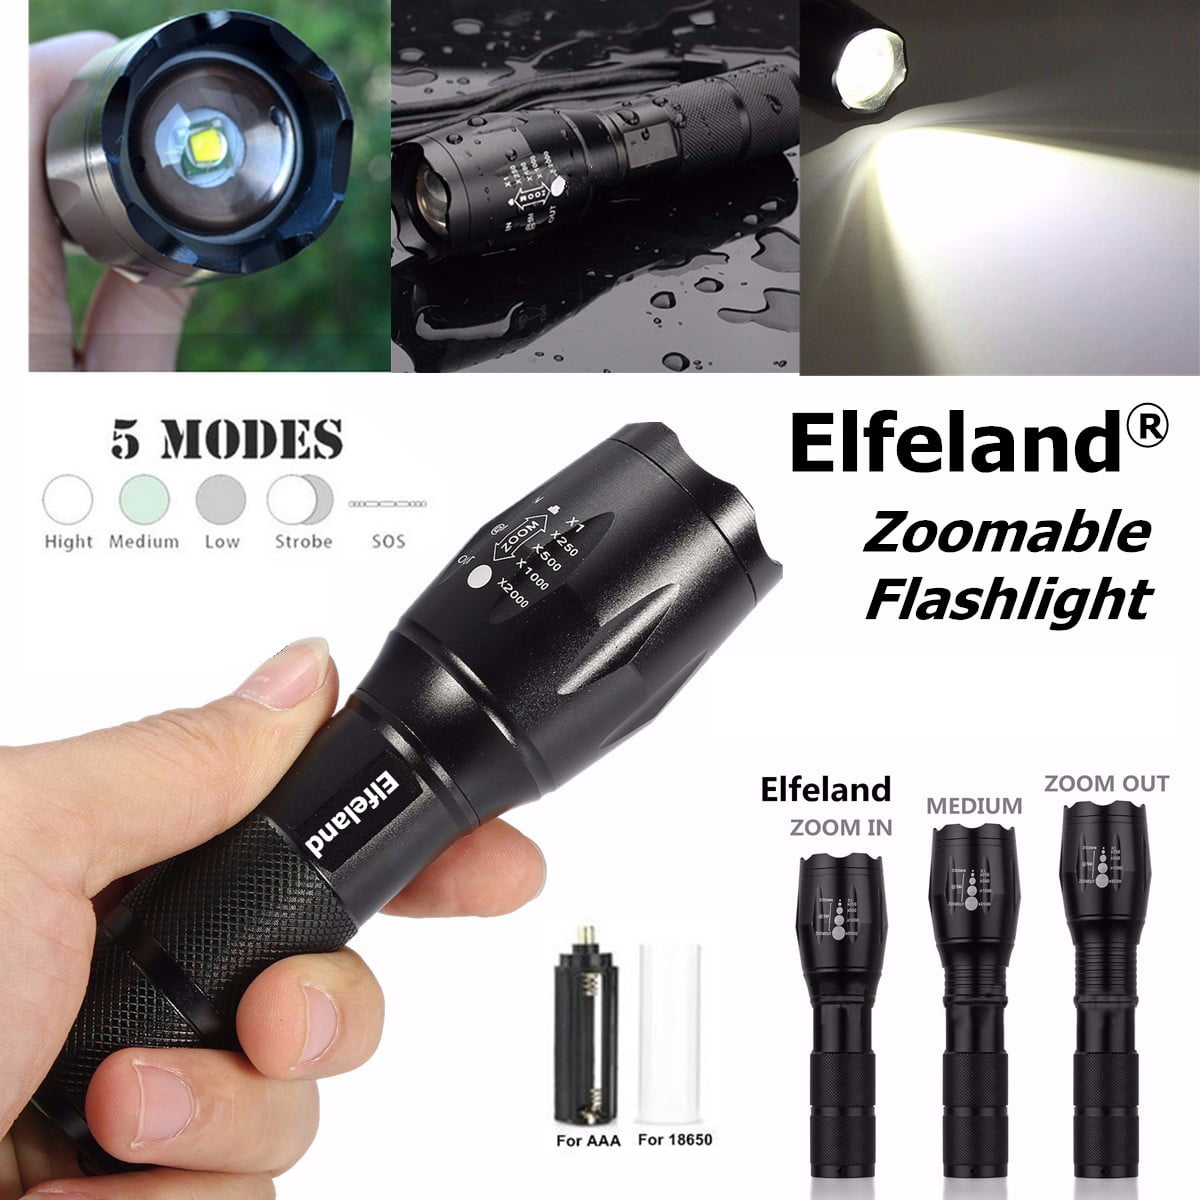 WUBEN A21 Powerful Tactical Flashlight 4200 Lumen Super Bright Rechargeable LED Torch 7 Modes Waterproof Handheld Light for Camping Hiking Emergency Outdoor 21700 Li-ion Battery Included 